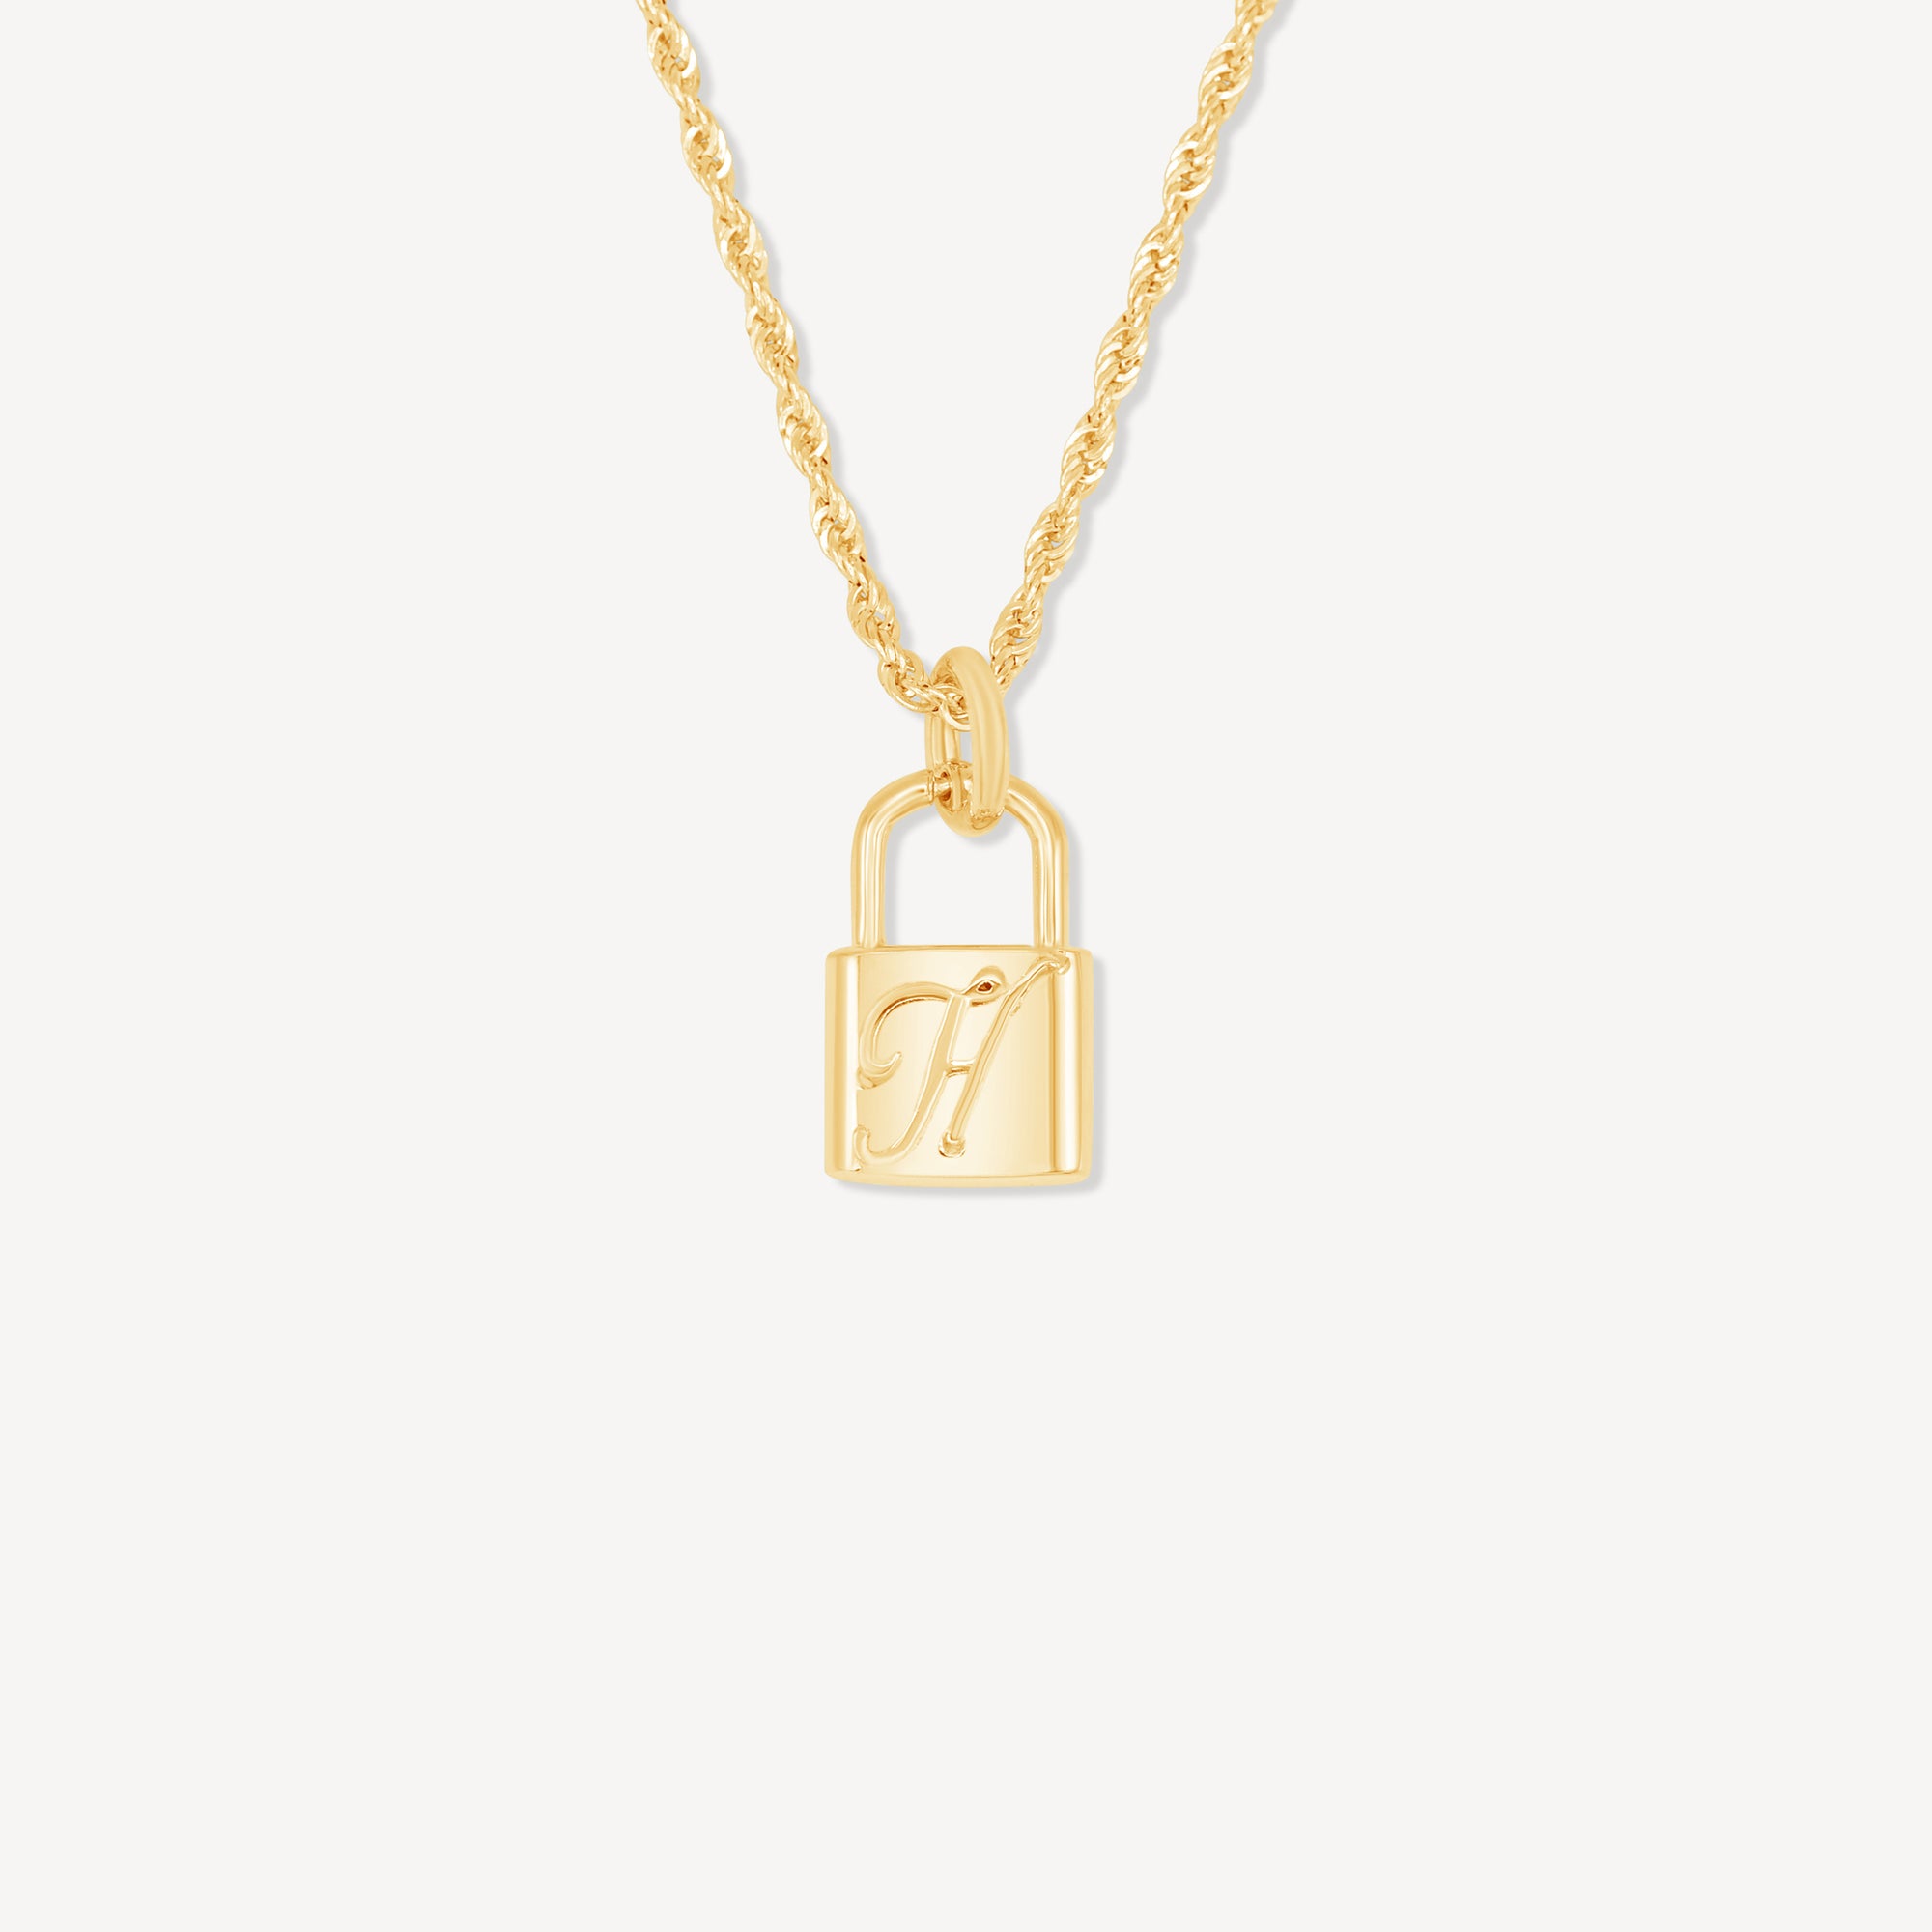 10K Gold Initial Lock Necklace